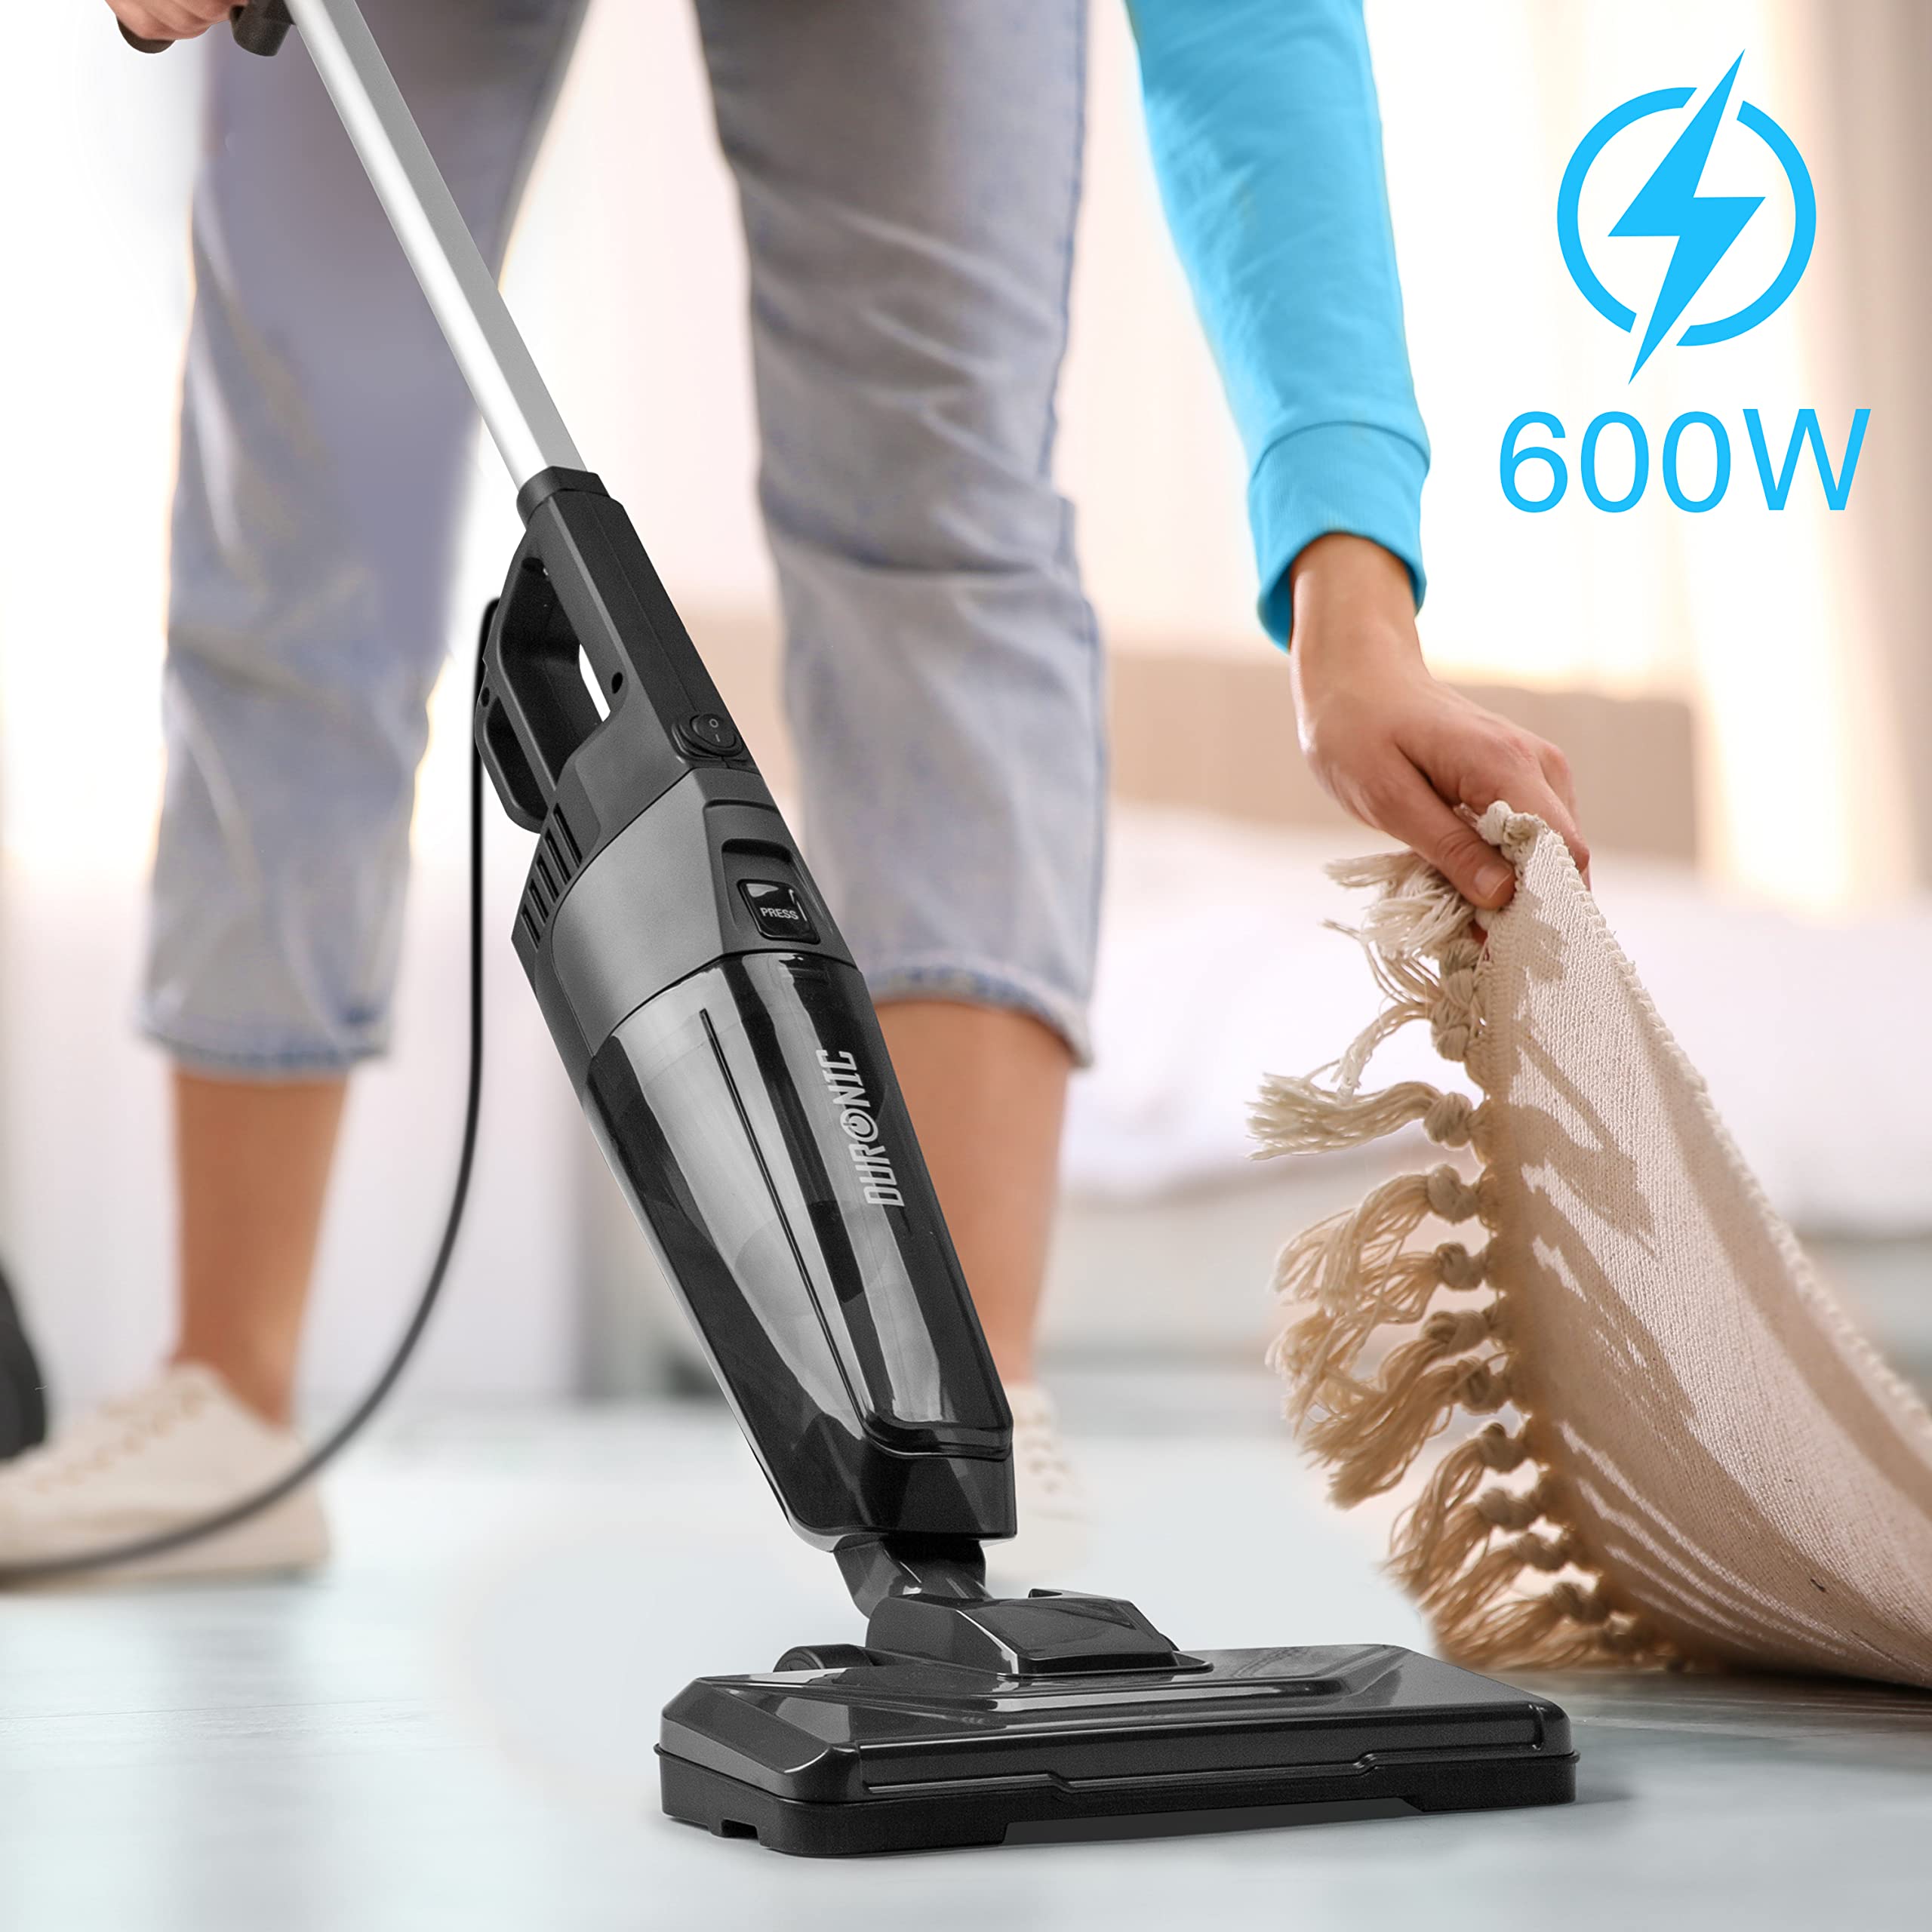 Duronic Upright Vacuum Cleaner VC9 Lightweight Corded Stick Vac Cleaners Hand Held Floor Carpet Upholstery Cleaner with HEPA Filter for Cleaning Dust, Hair in Home & Car